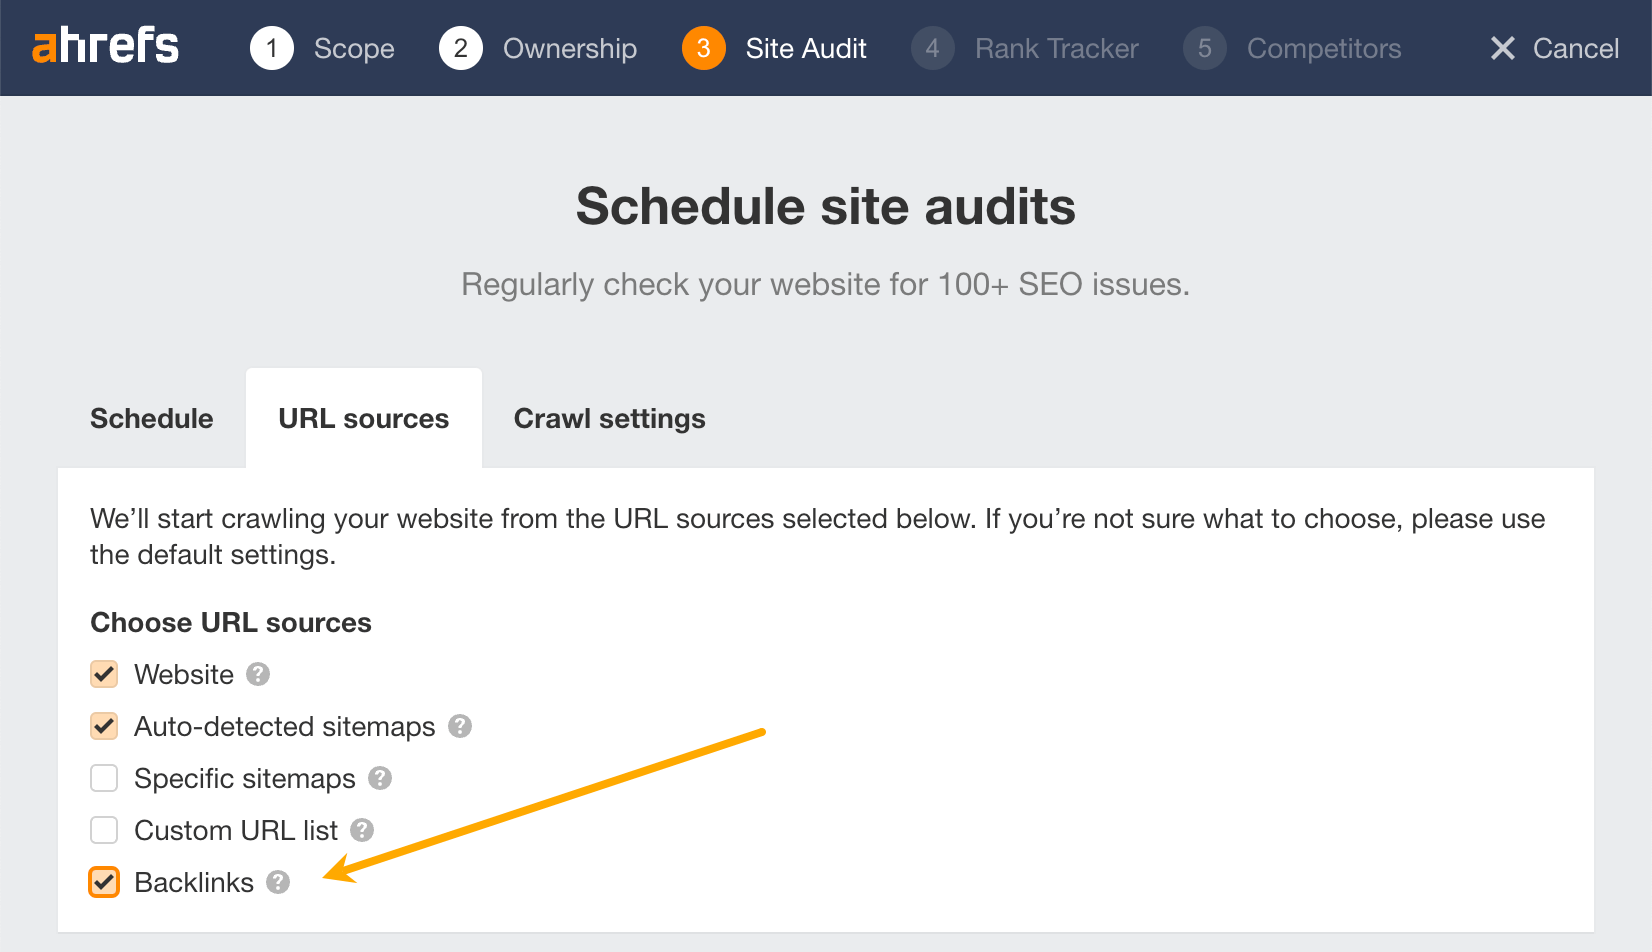 Turning on backlinks as a URL source in Ahrefs' Site Audit